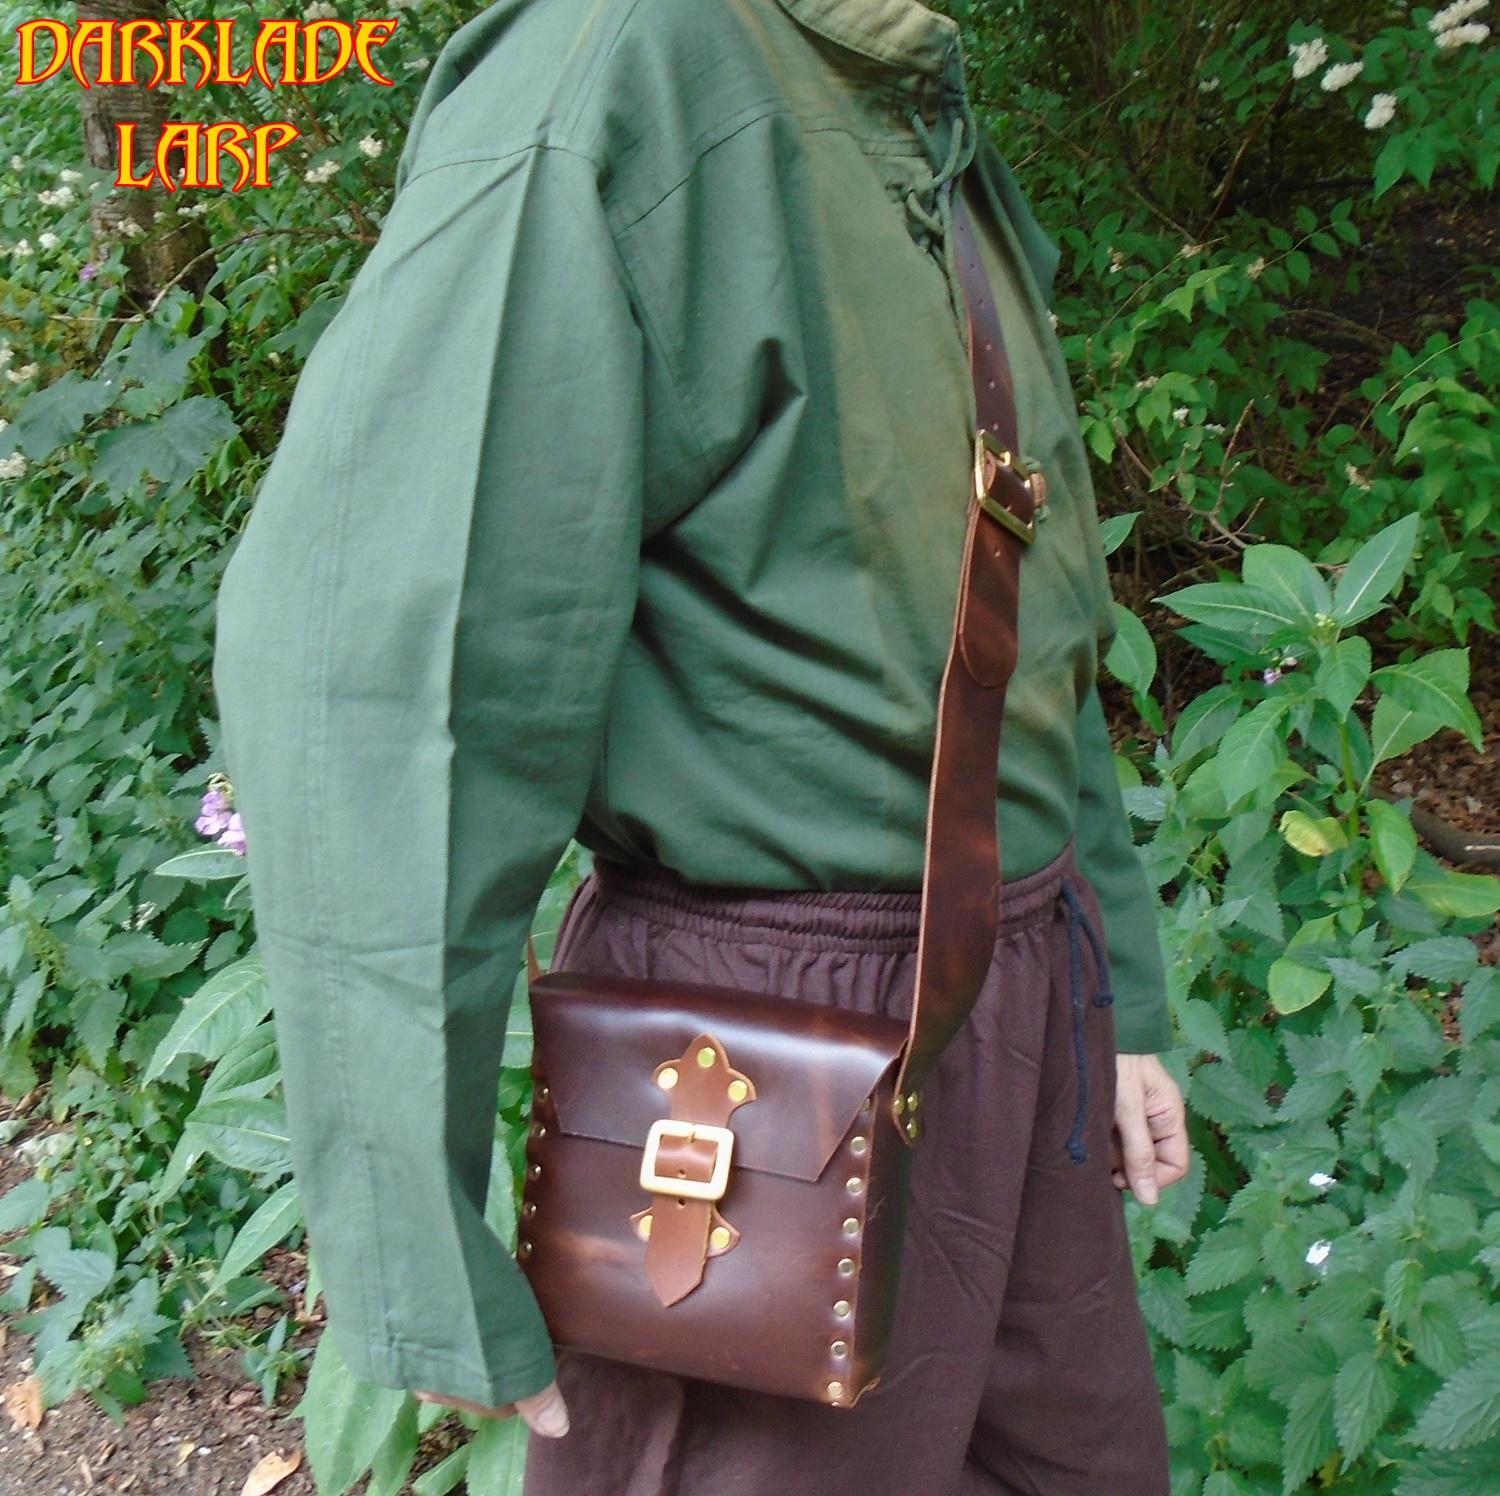 small leather satchel with a buckle closure being worn across the body